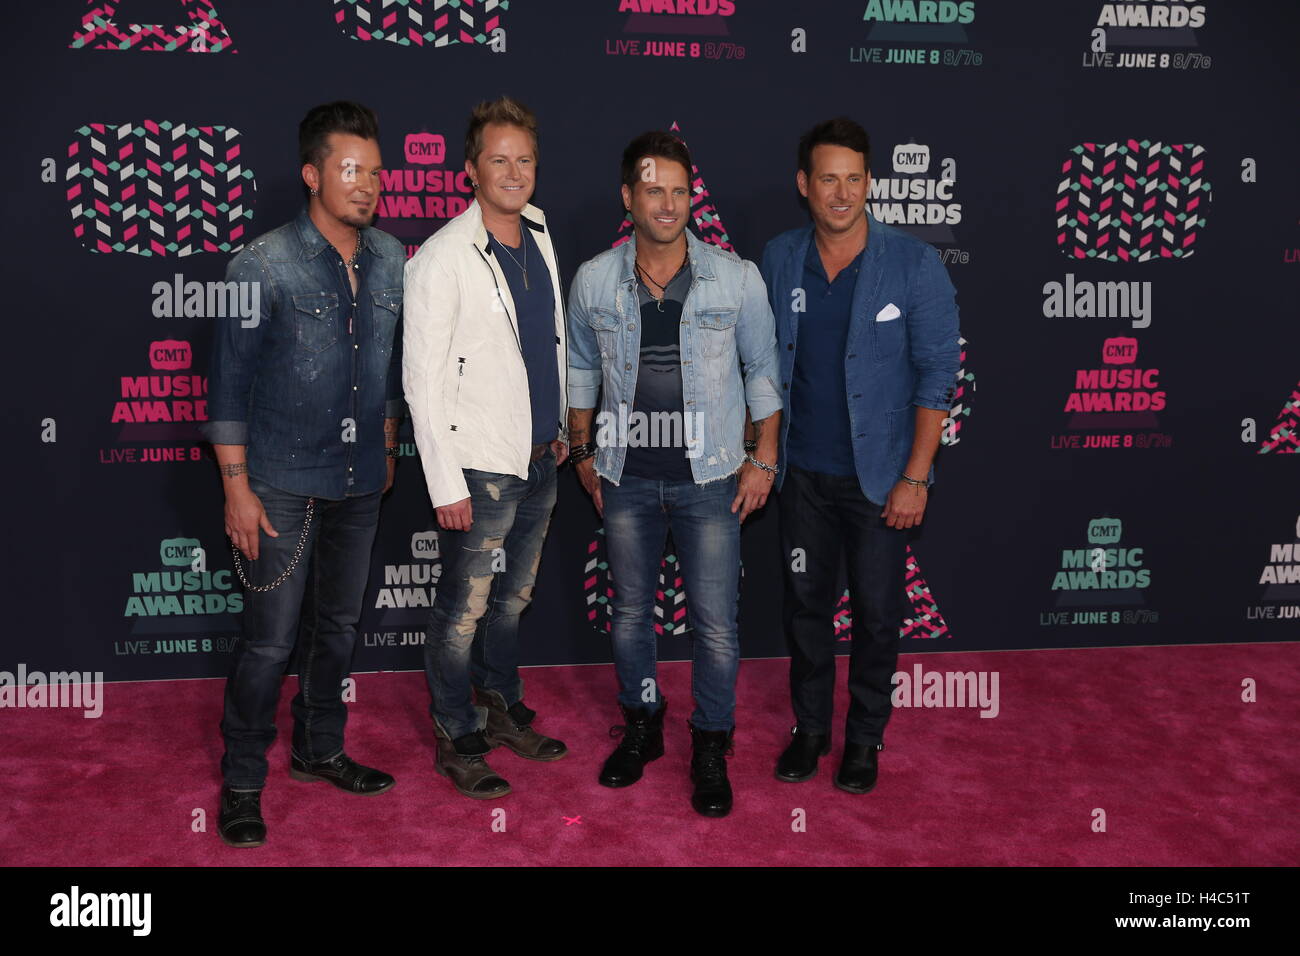 Parmalee walks the red carpet at the CMT Music Awards at Bridgestone Arena on June 8th, 2016 in Nashville, TN. Stock Photo